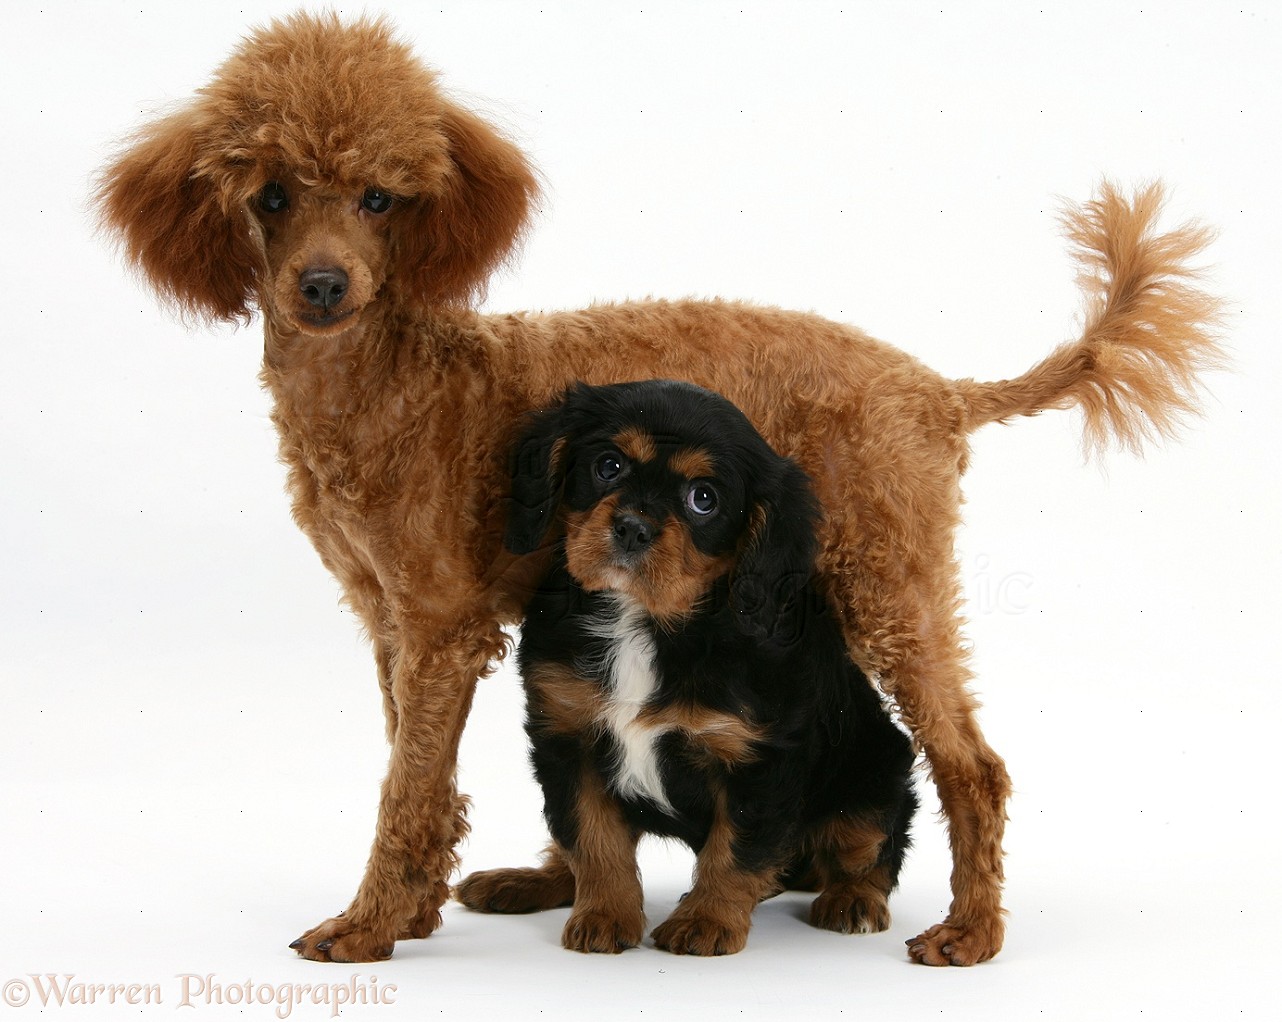 Poodle And Cavalier King Charles Spaniel Shop 1688290731